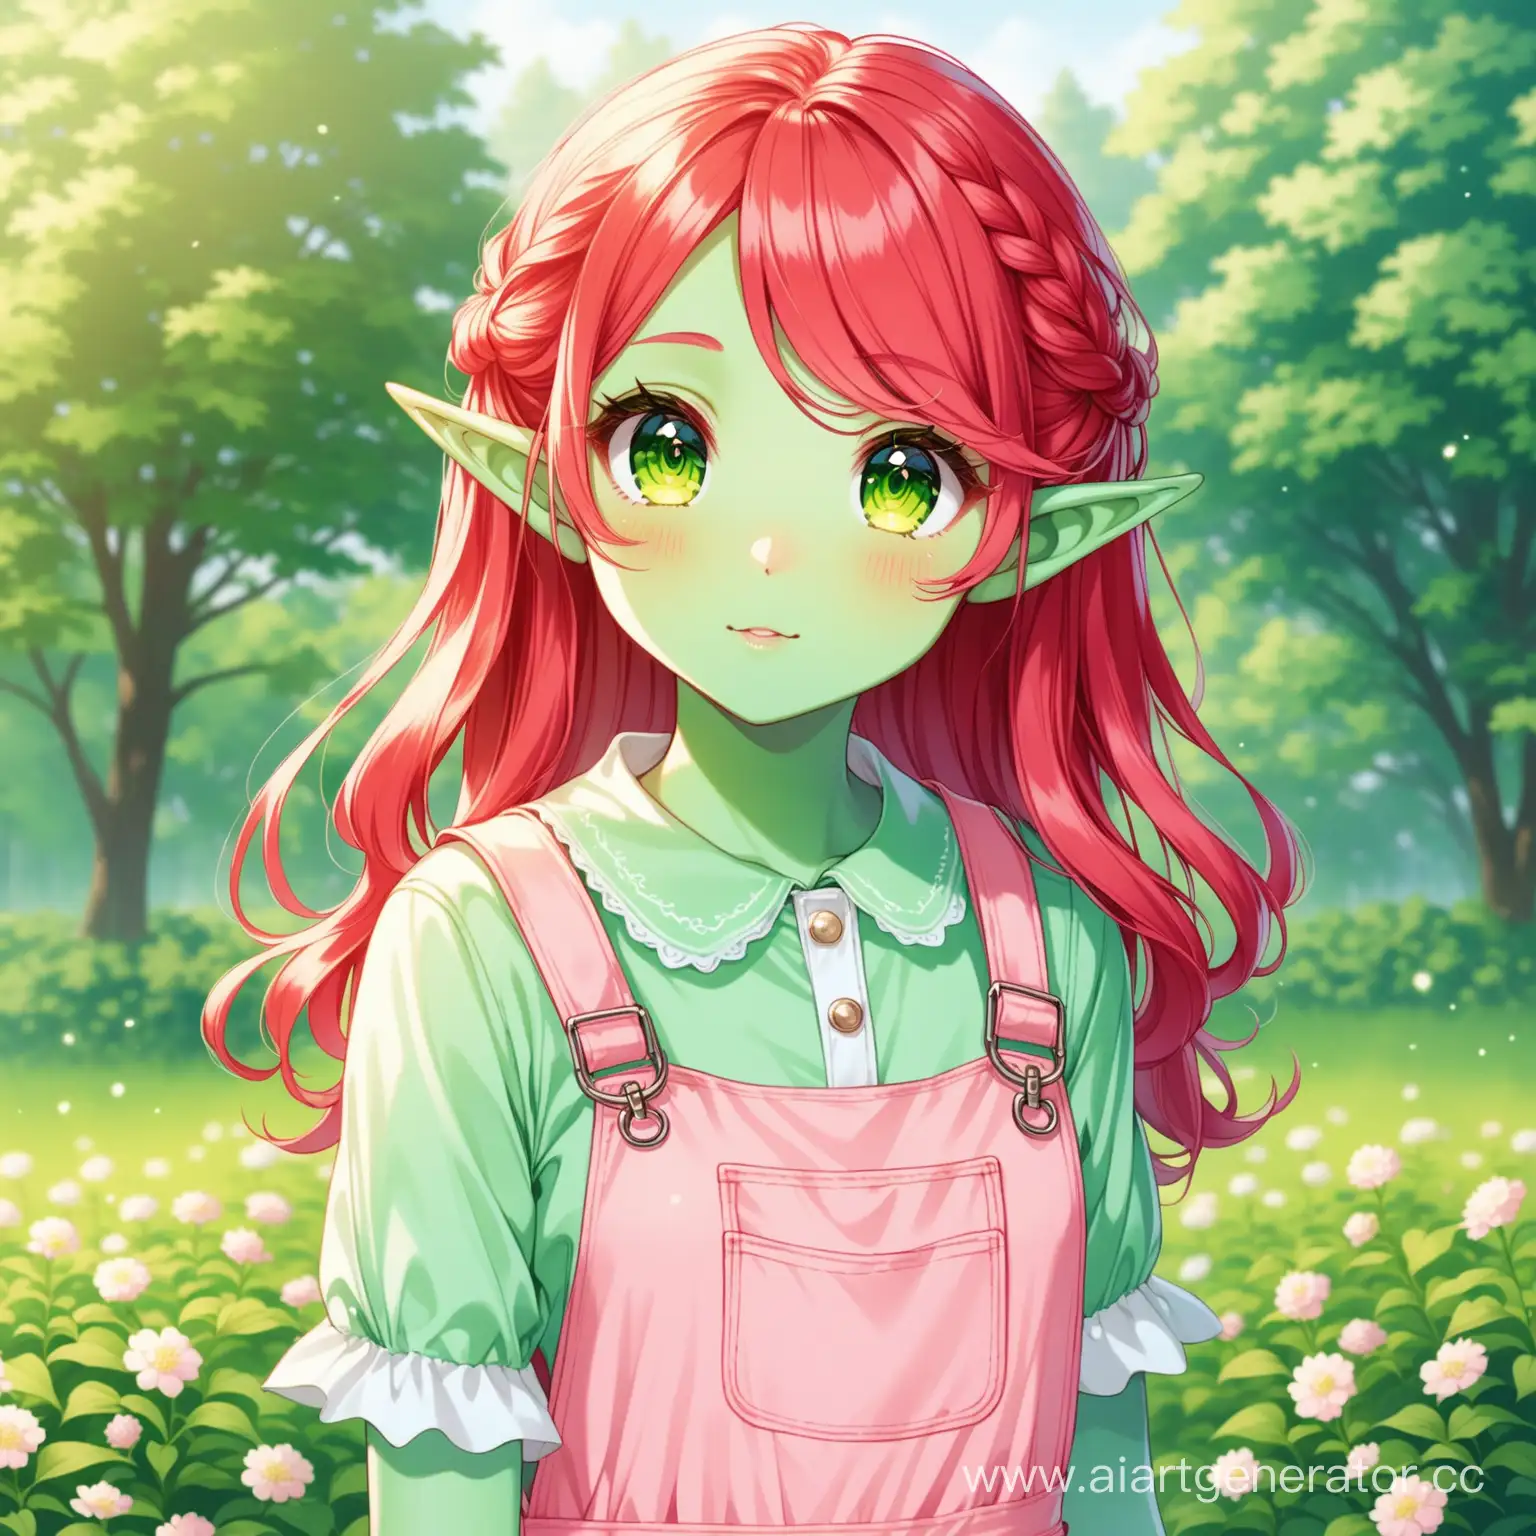 Enchanting-Elf-Girl-with-Green-Skin-and-Red-Hair-in-Pastel-Pink-Overalls-Cottage-Style-Fantasy-Portrait